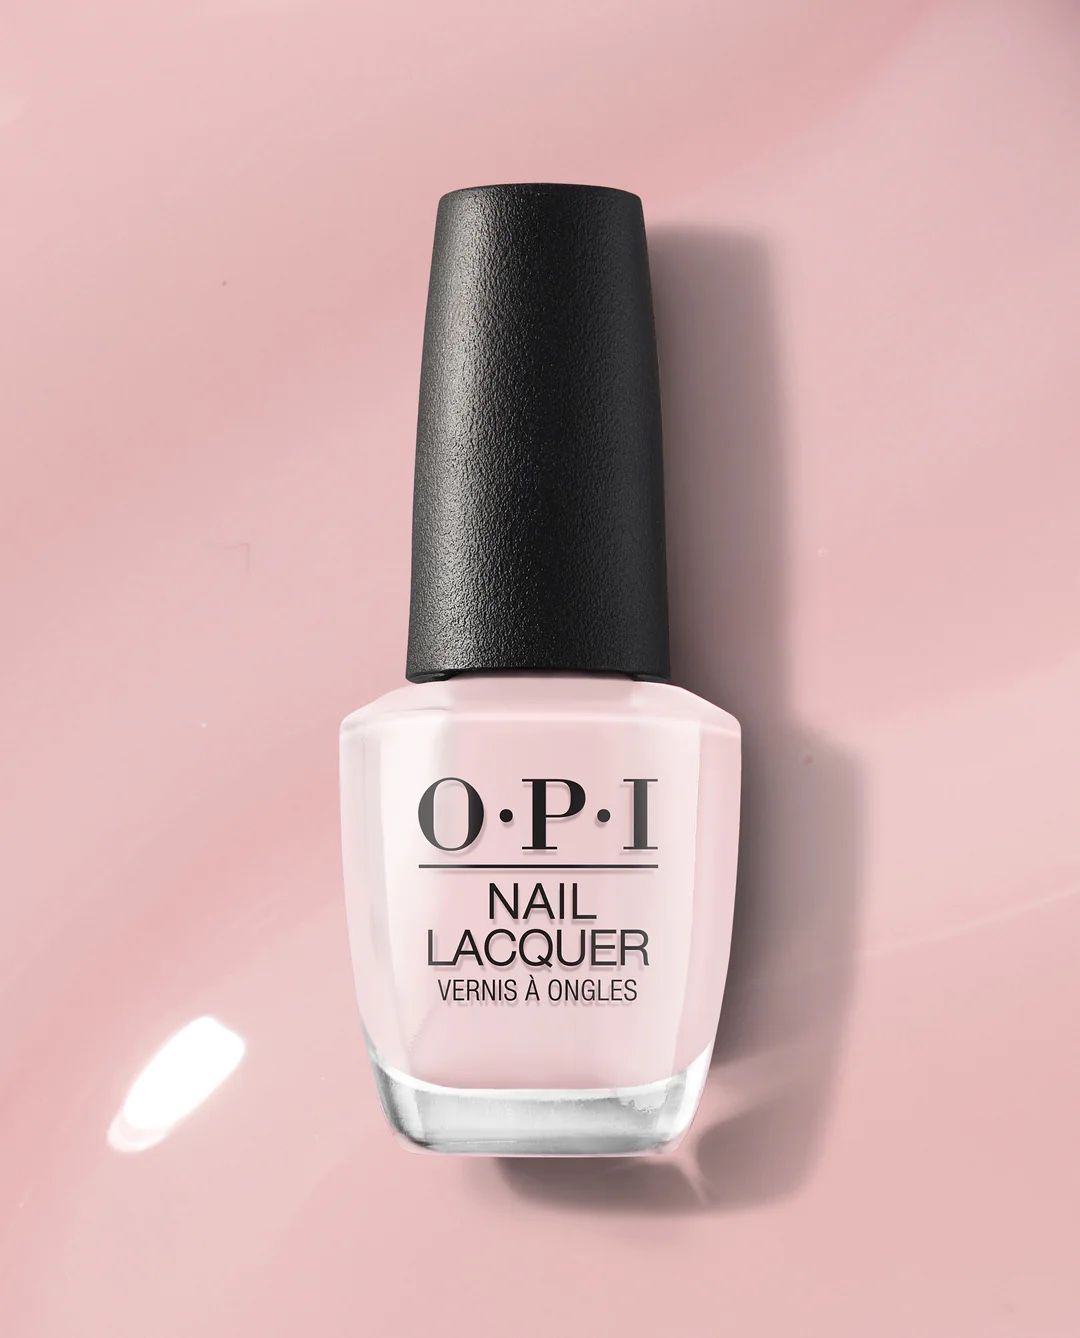 Nail lacquer Baby, Take a Vow